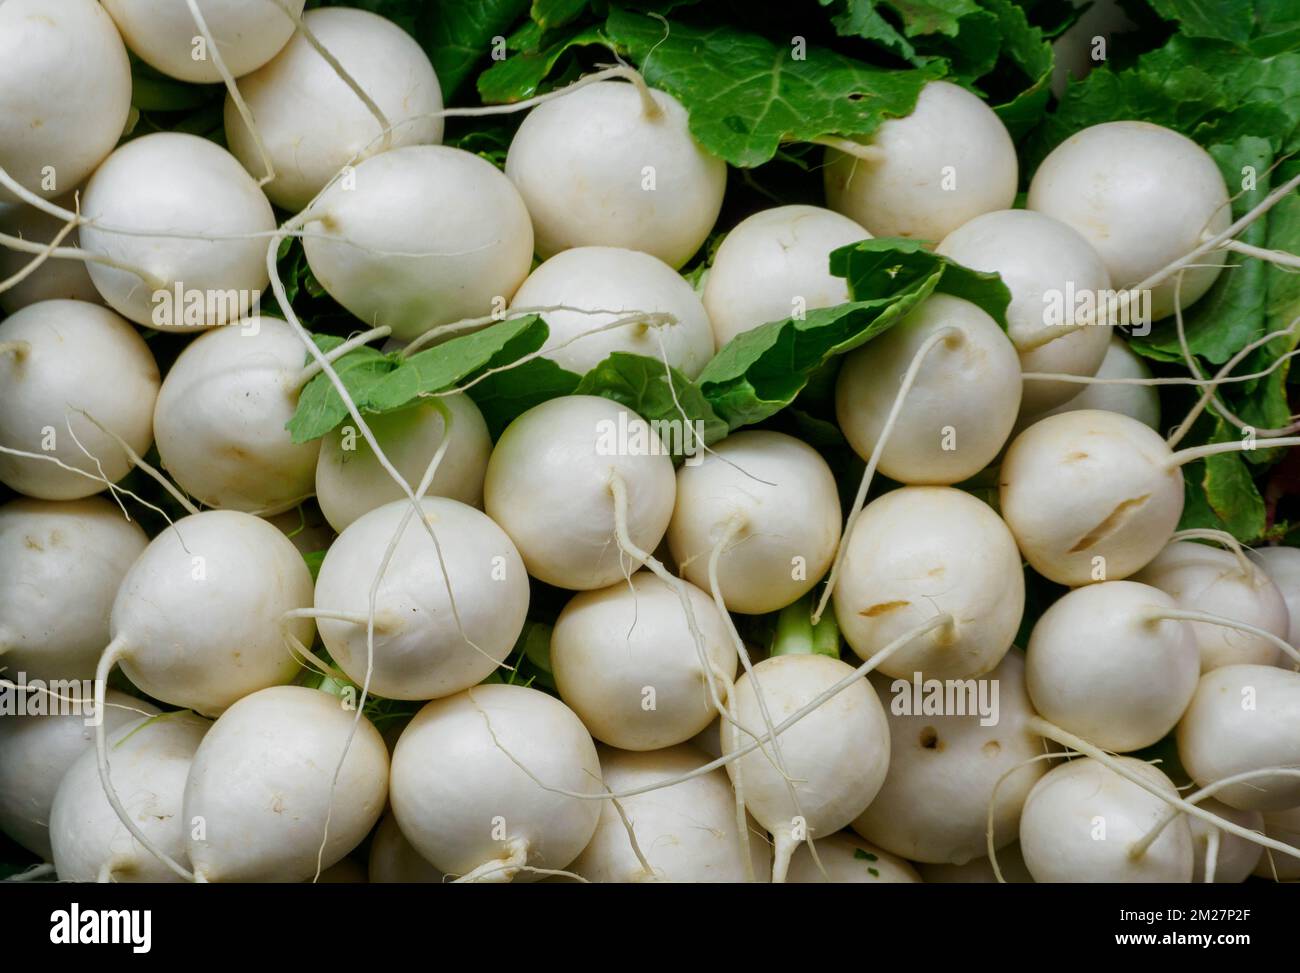 White radishes with green leaves Stock Photo